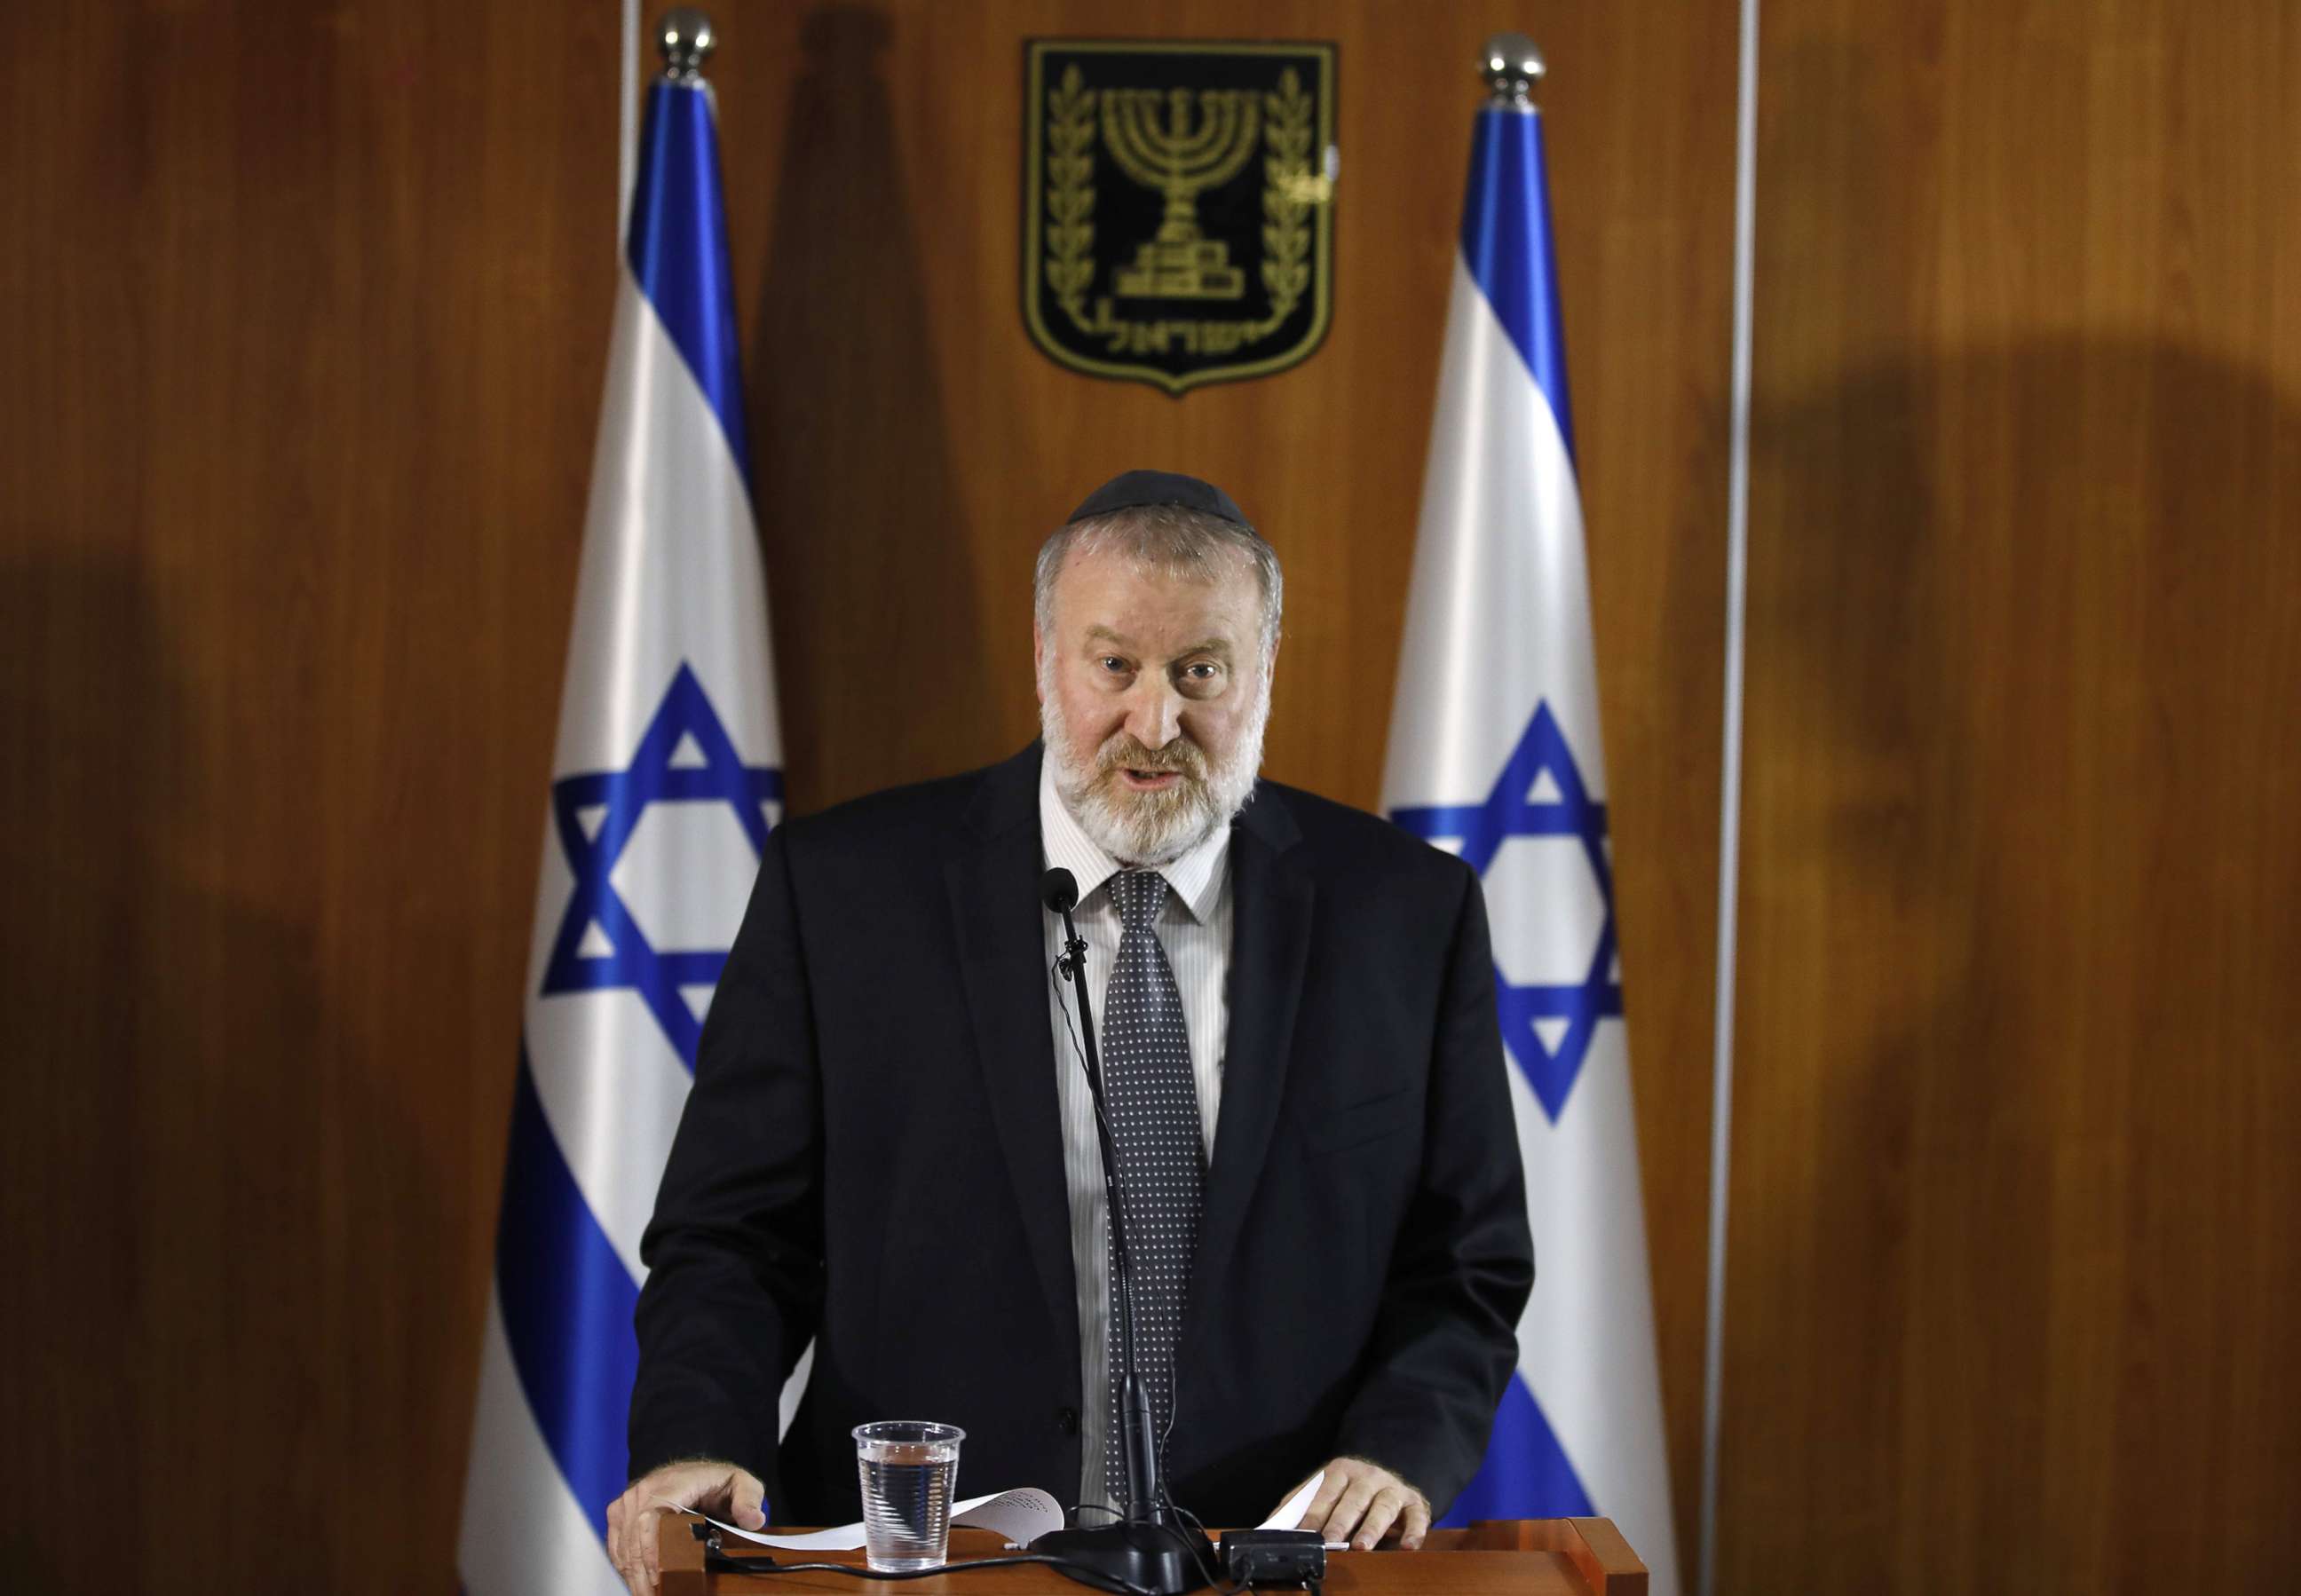 PHOTO: Israel's attorney general, Avichai Mandelblit gives a press conference at the justice ministry in Jerusalem on Nov. 21, 2019. Mandelblit indicted Benjamin Netanyahu on a range of corruption charges.